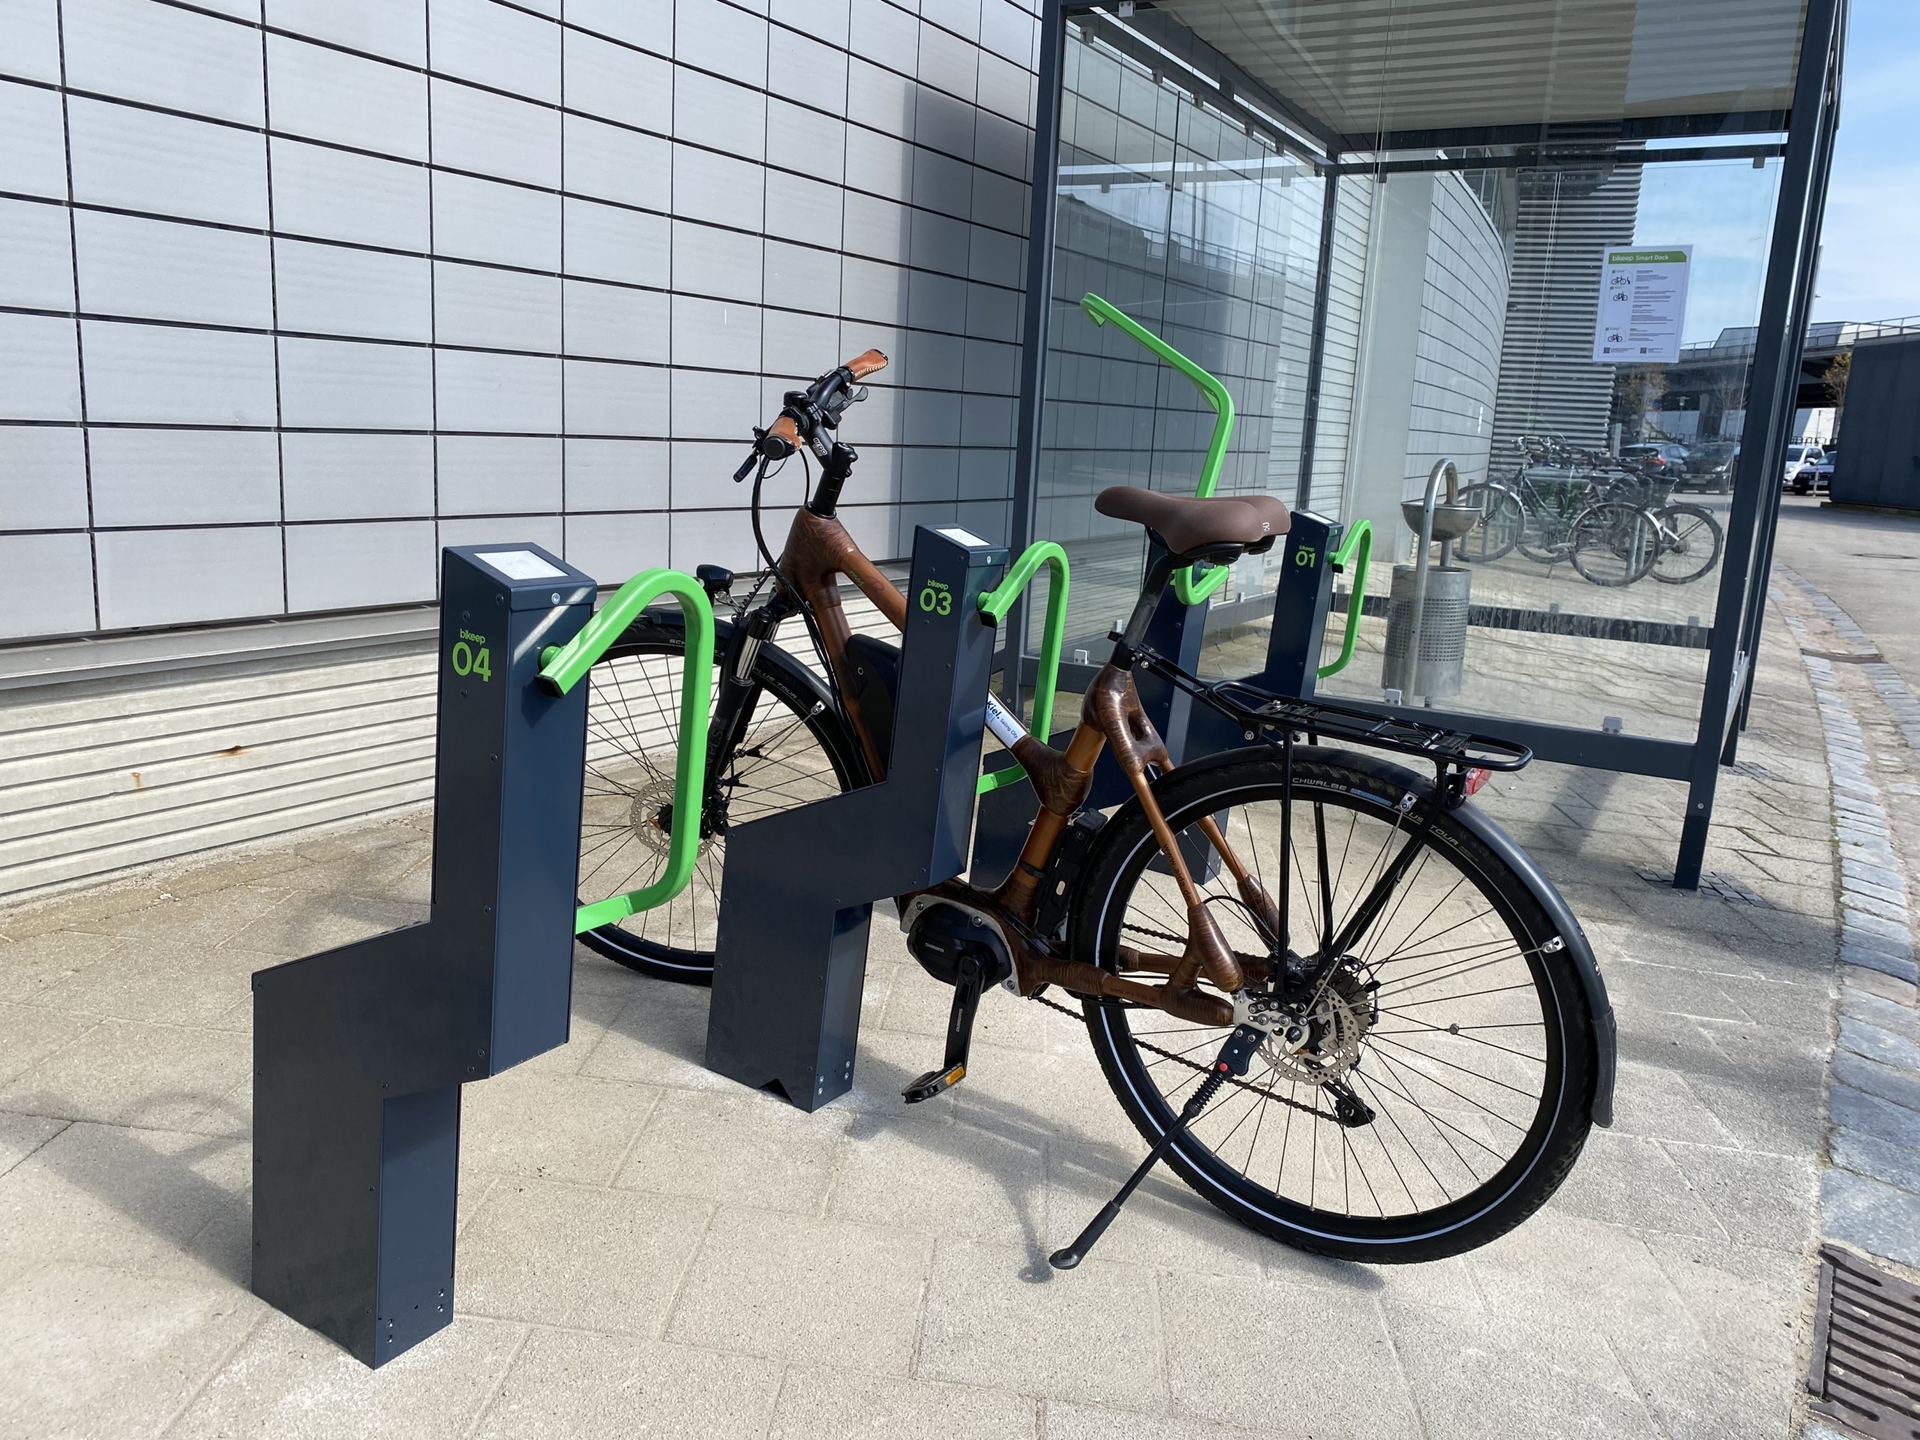 An eBike locked to a public bicycle rack.